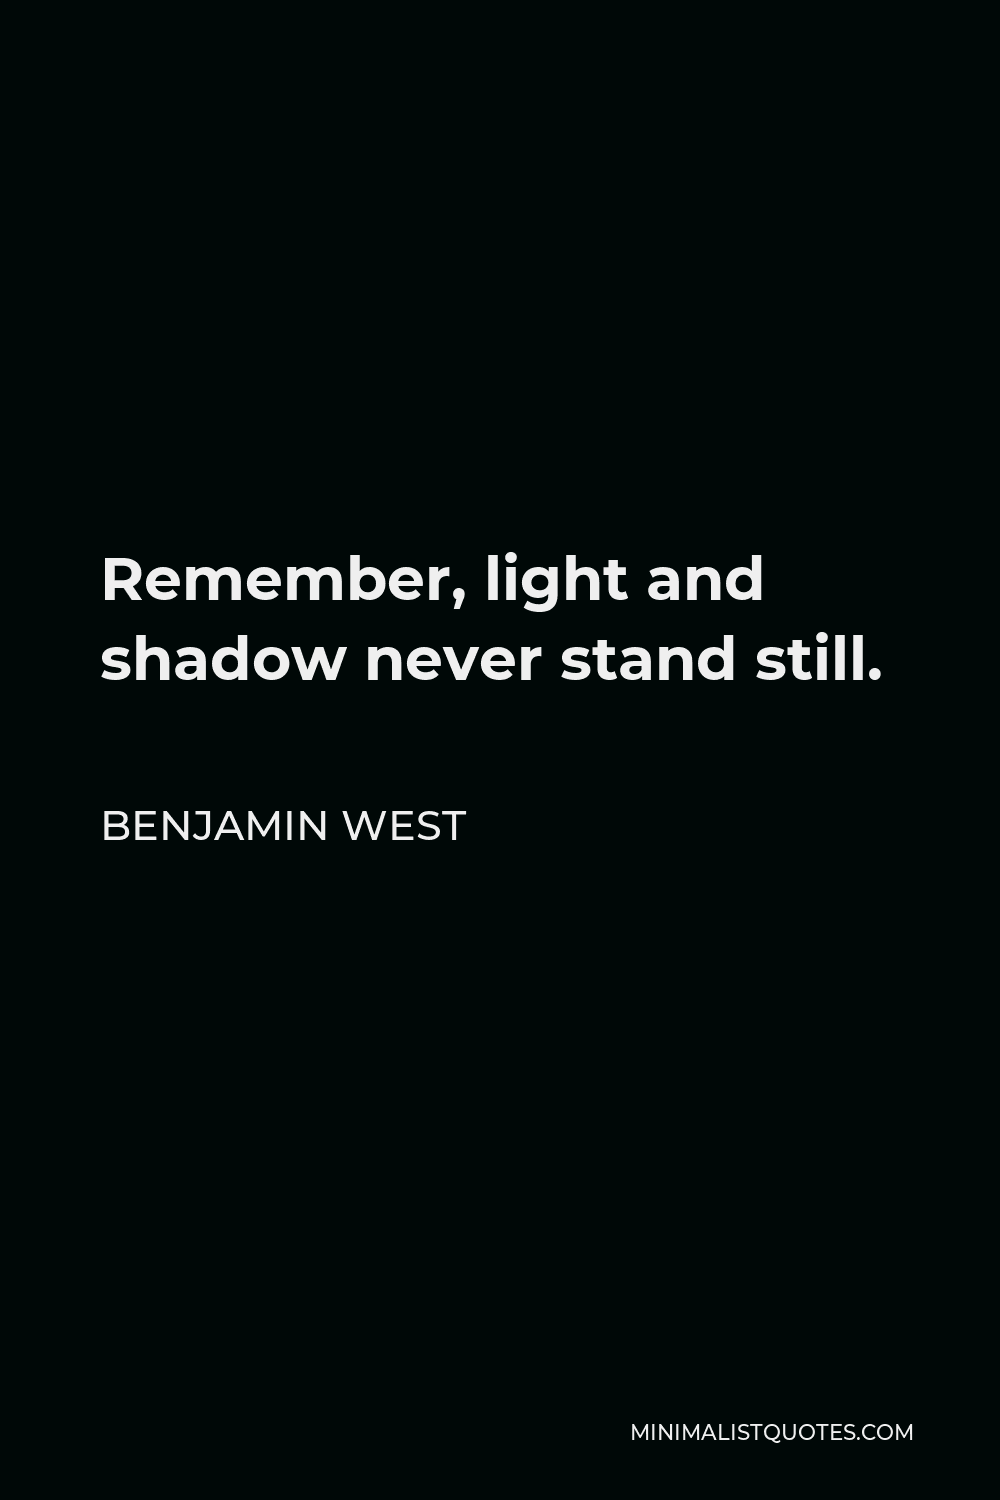 Benjamin West Quote - Remember, light and shadow never stand still.